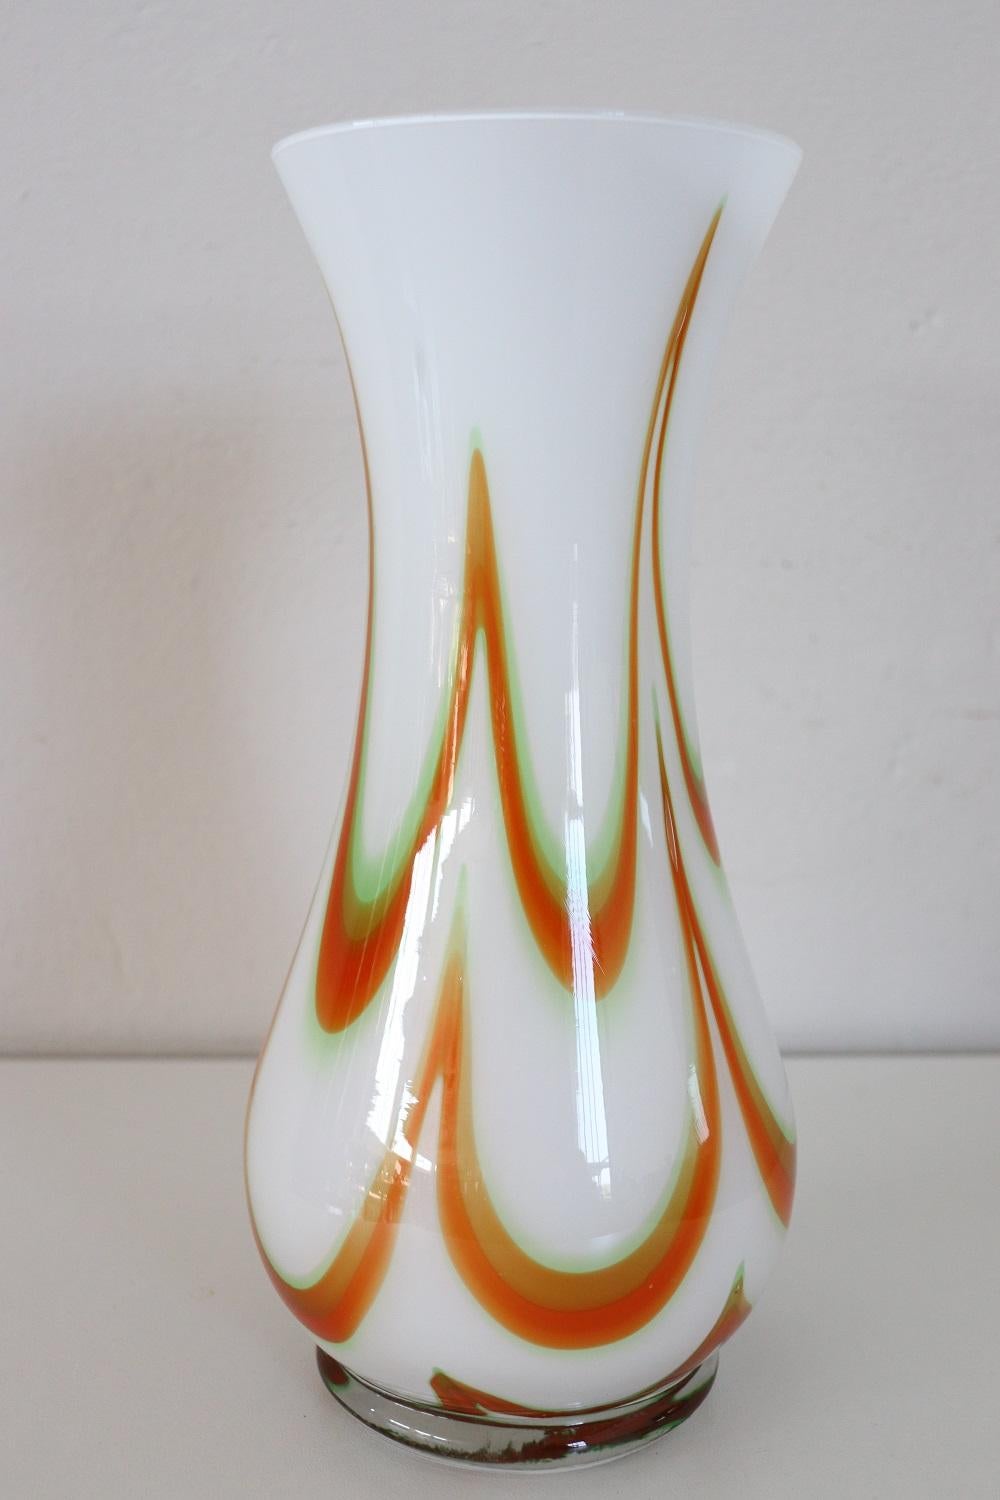 Refined artistic glass vase, Italy, production 1960s Murano. Non signé. High quality artistic in milky white color with a particular decoration reminiscent of kinetic art in the colors of orange. Perfect for an environment with furnishings from the